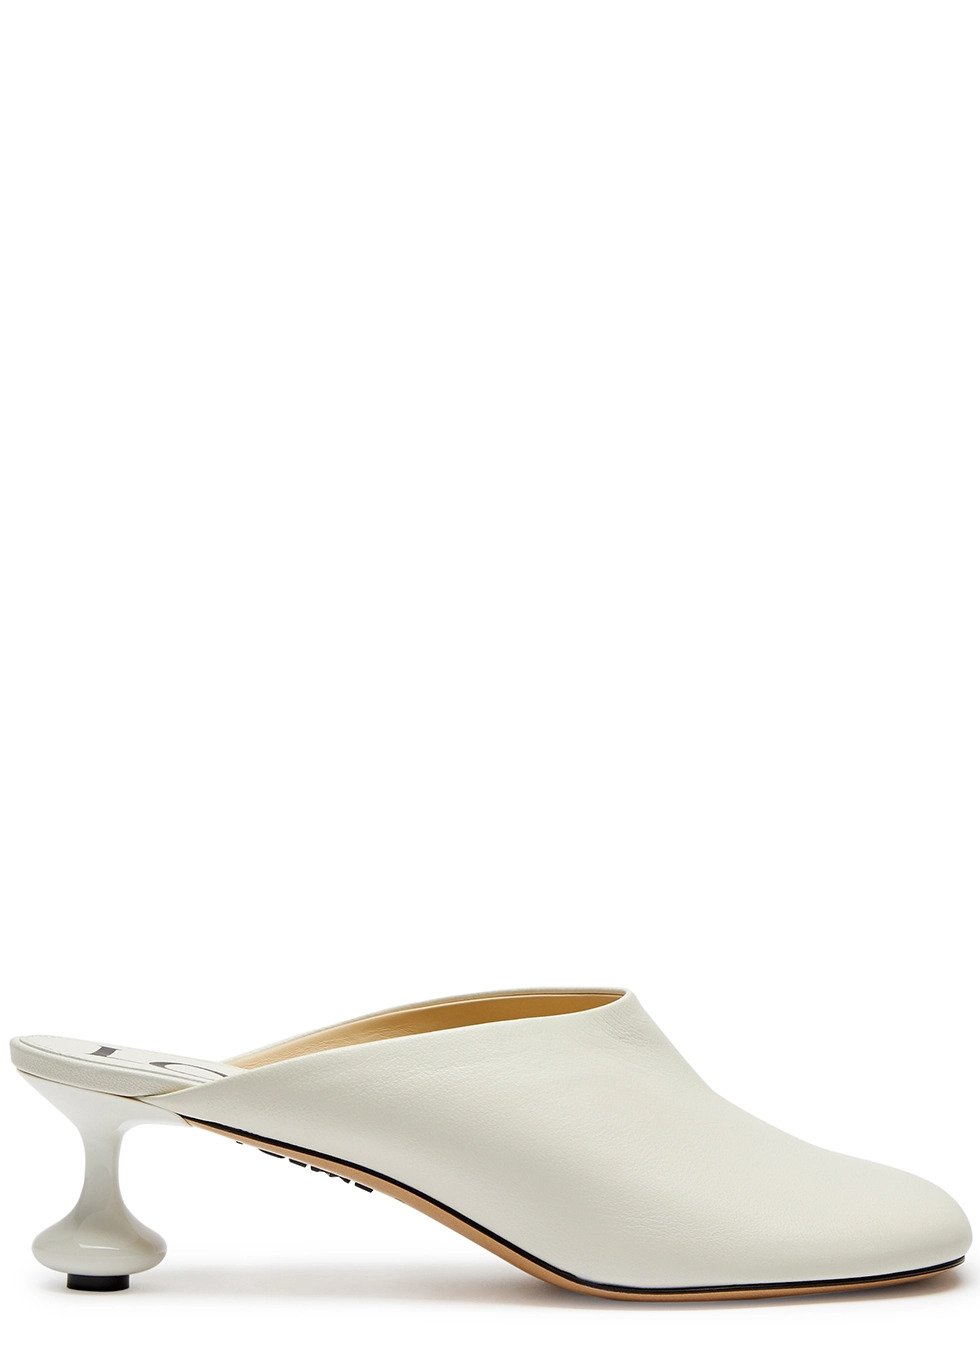 Loewe + Toy forty five Leather Mules